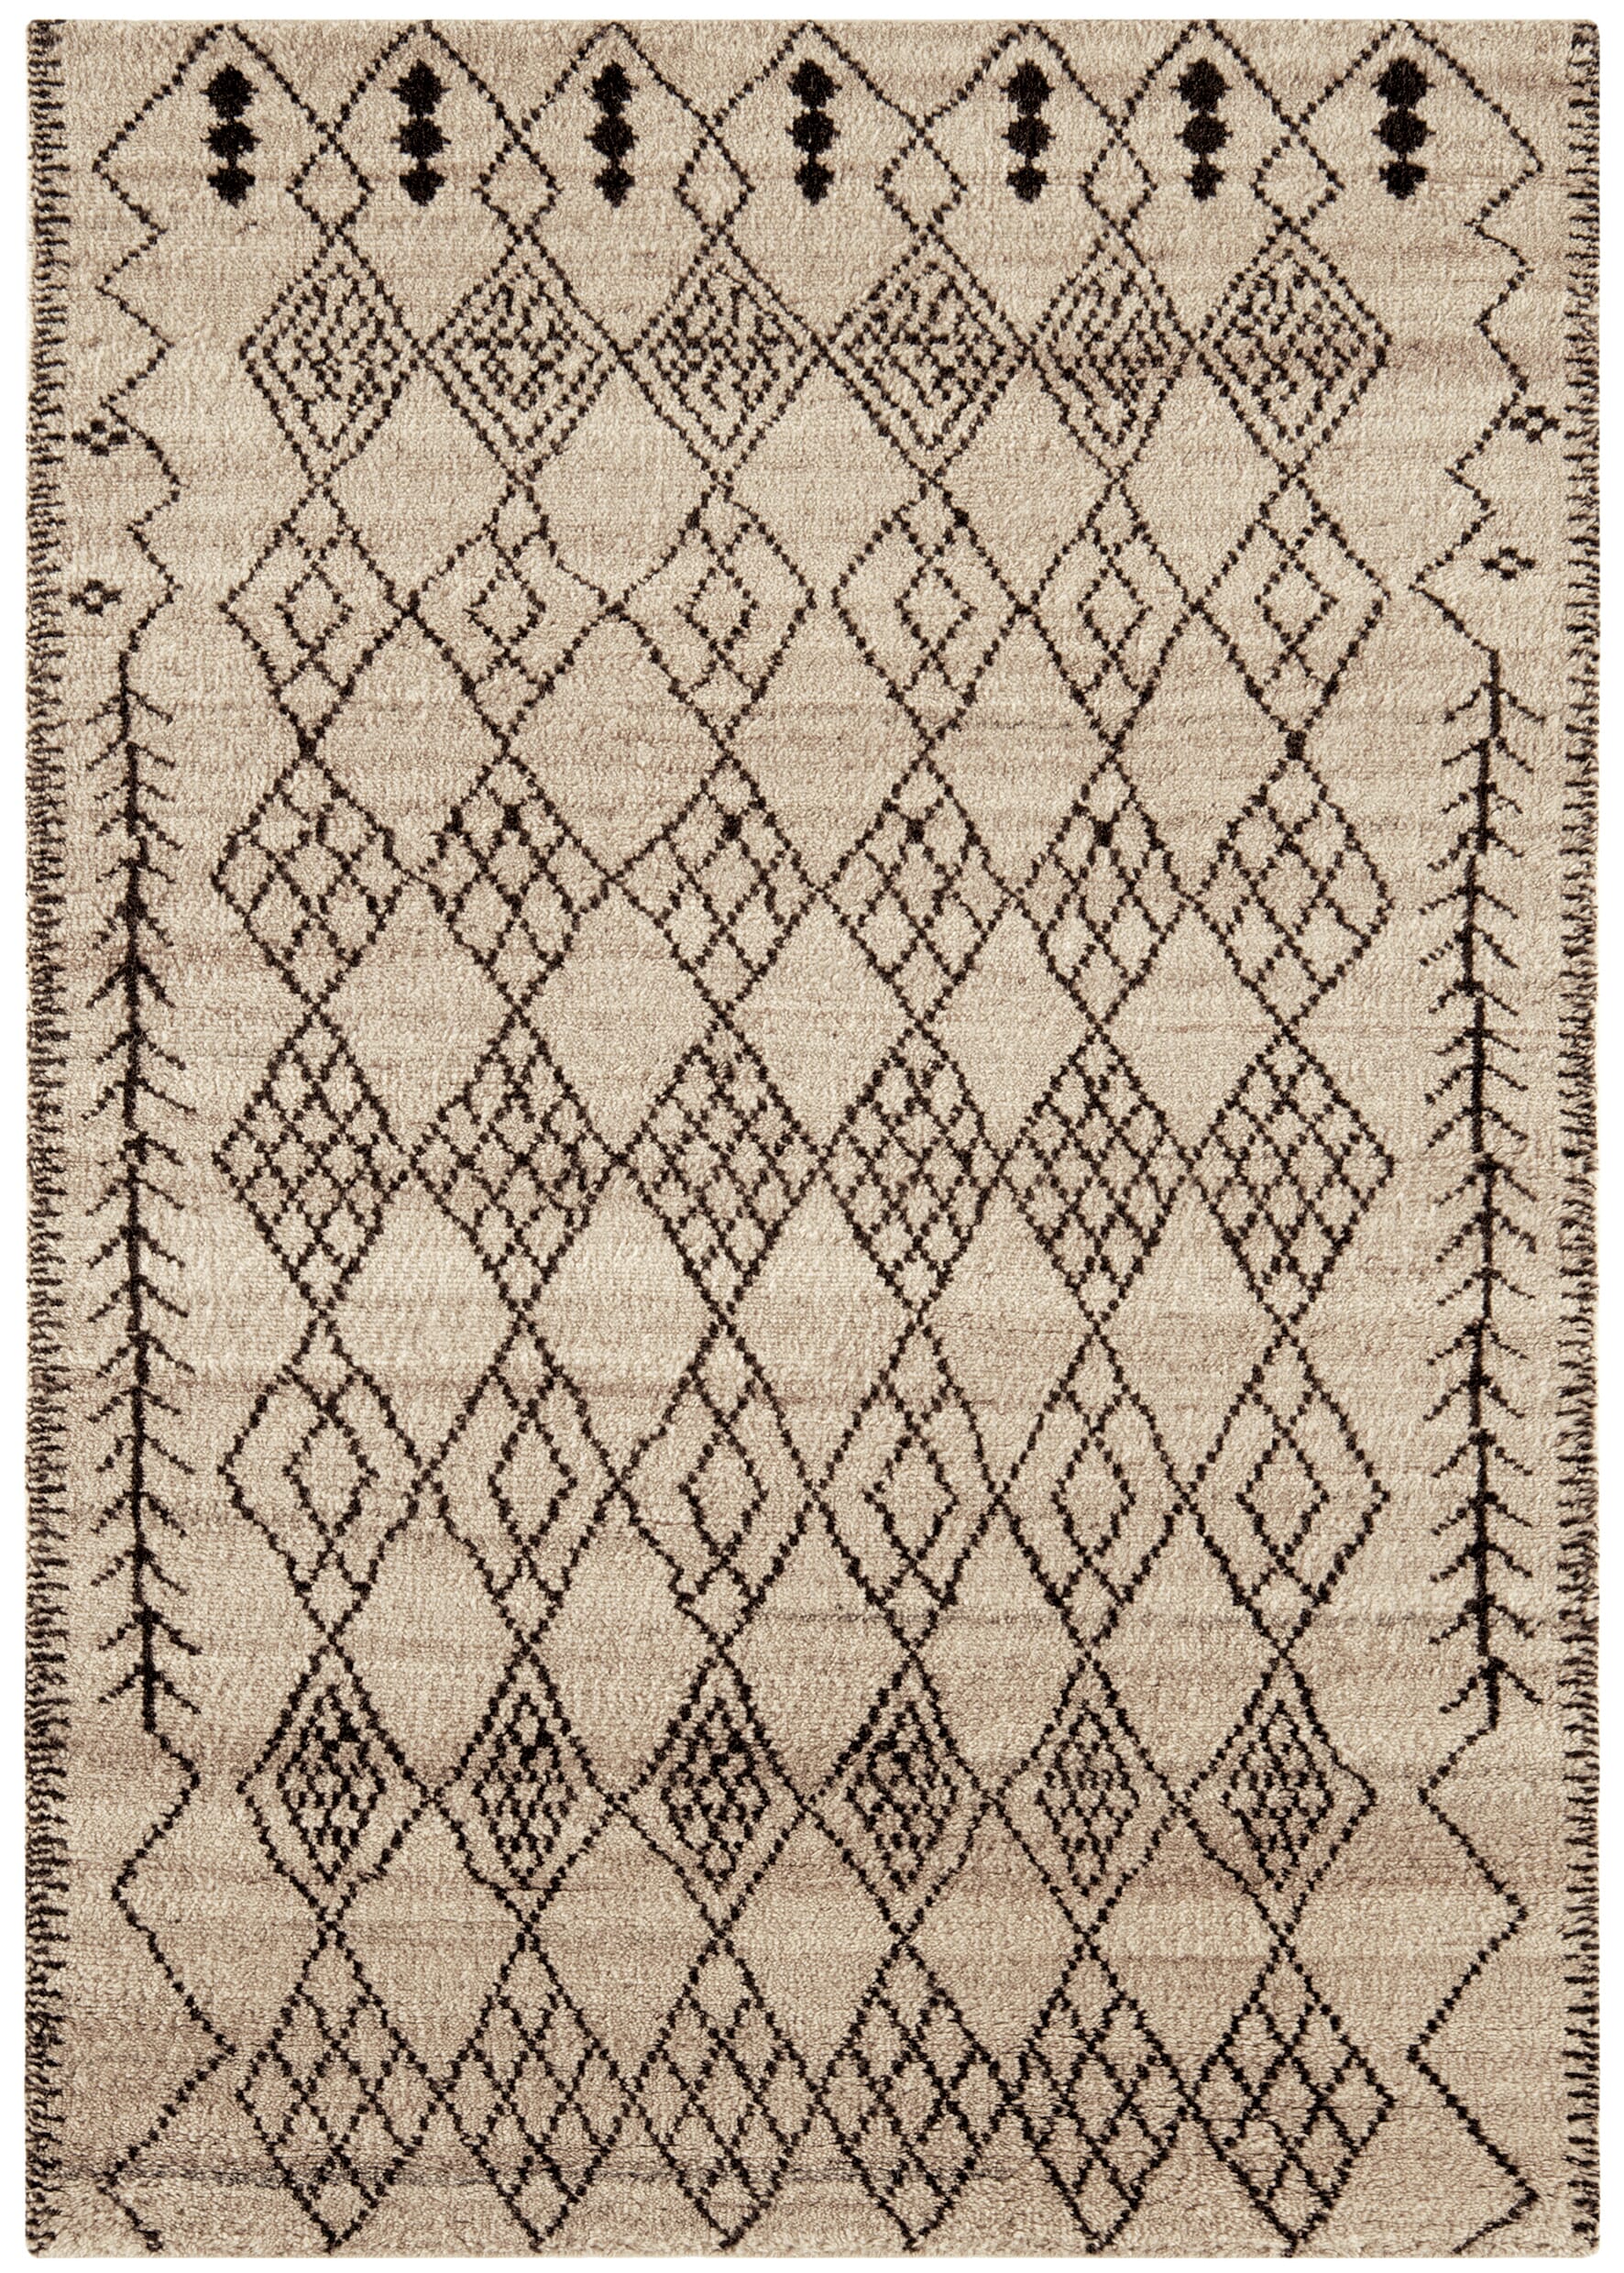 Amira Hand Knotted Moroccan Berber Wool Rug AM001